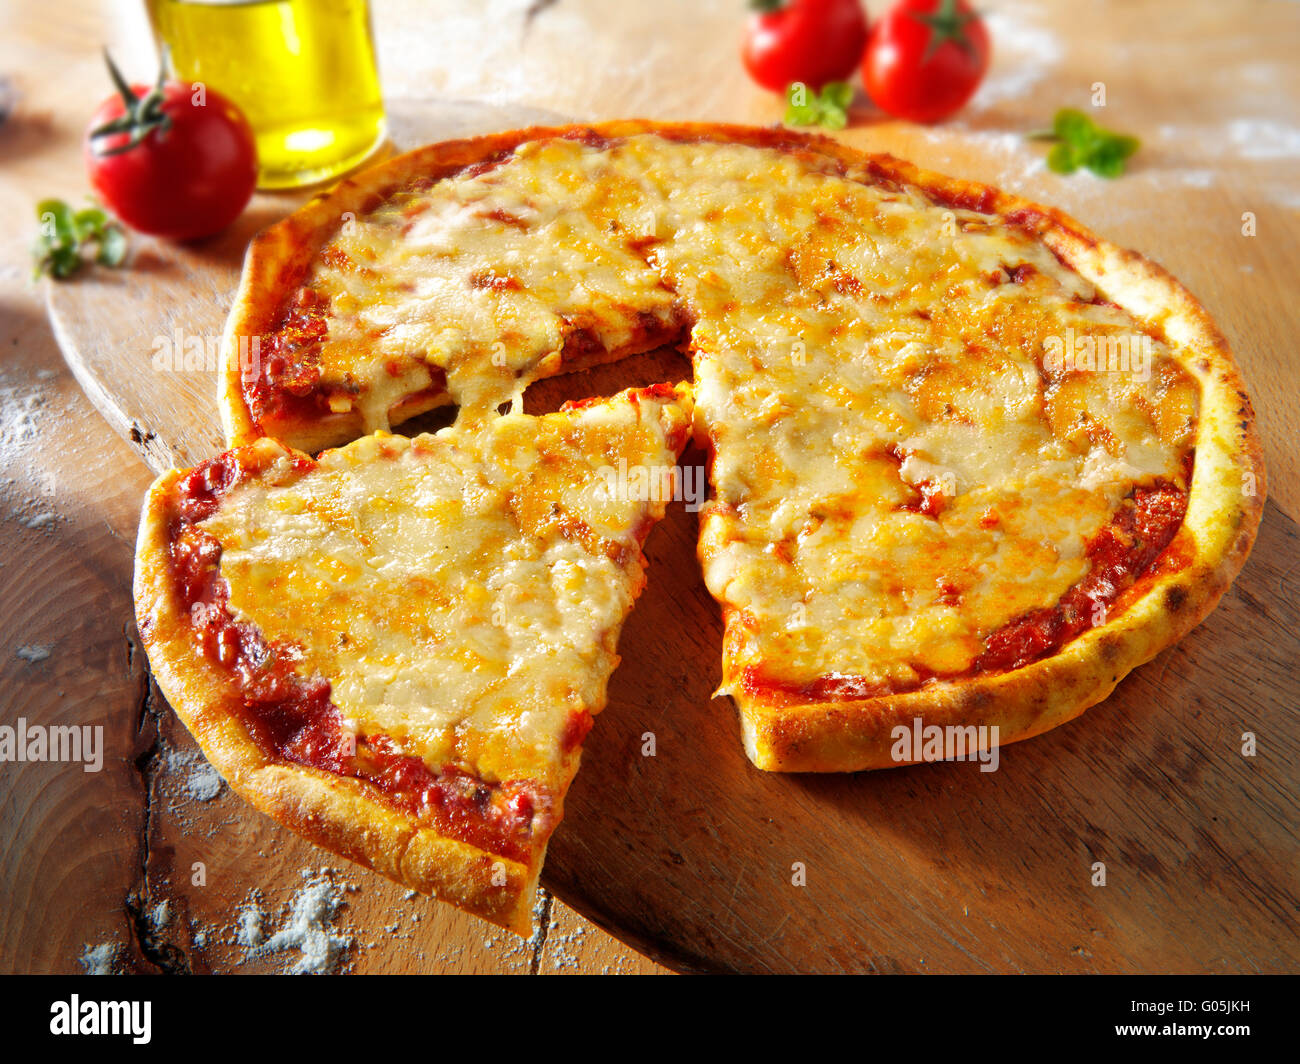 Cooked whole cheese and tomato Margherita pizza with a cut slice Stock Photo